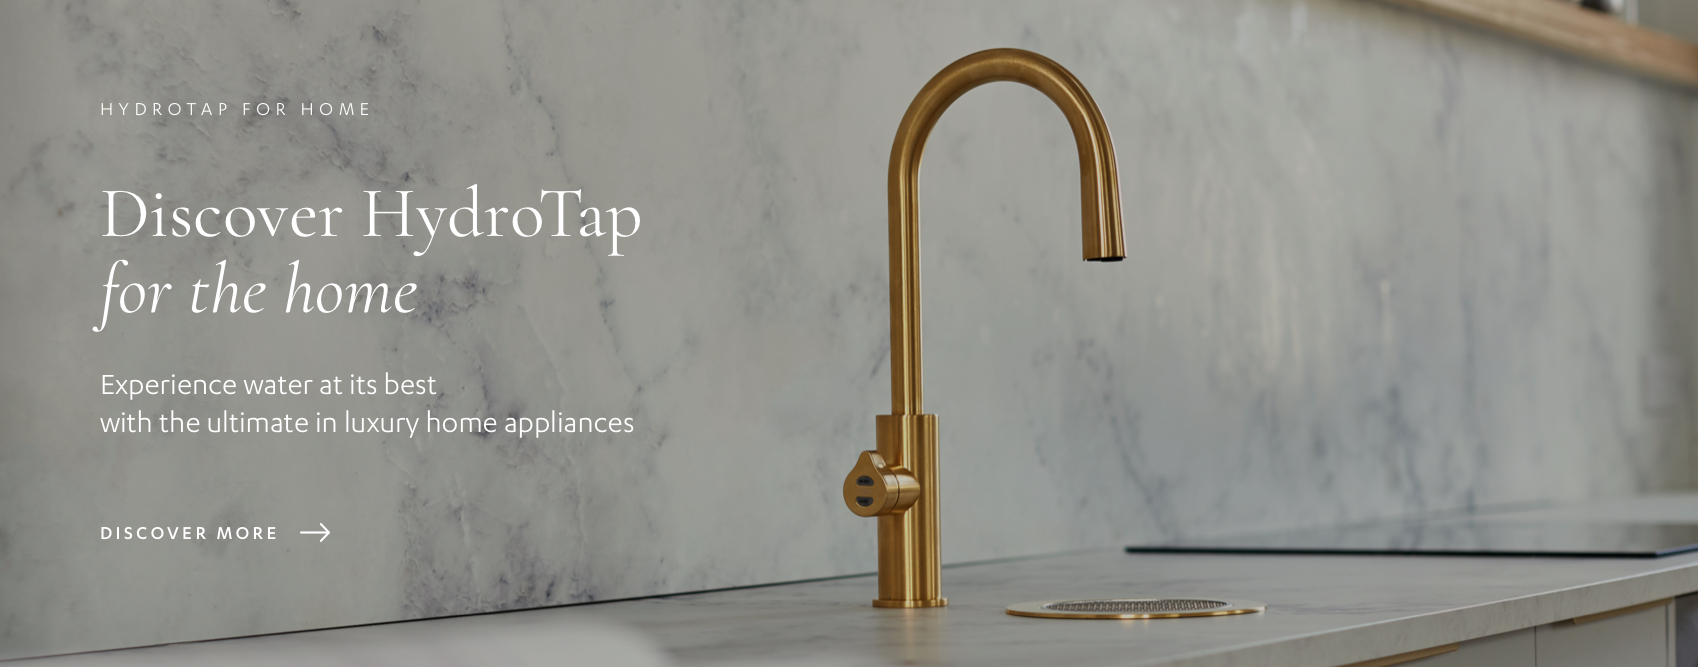 Discover Hydrotap for the home